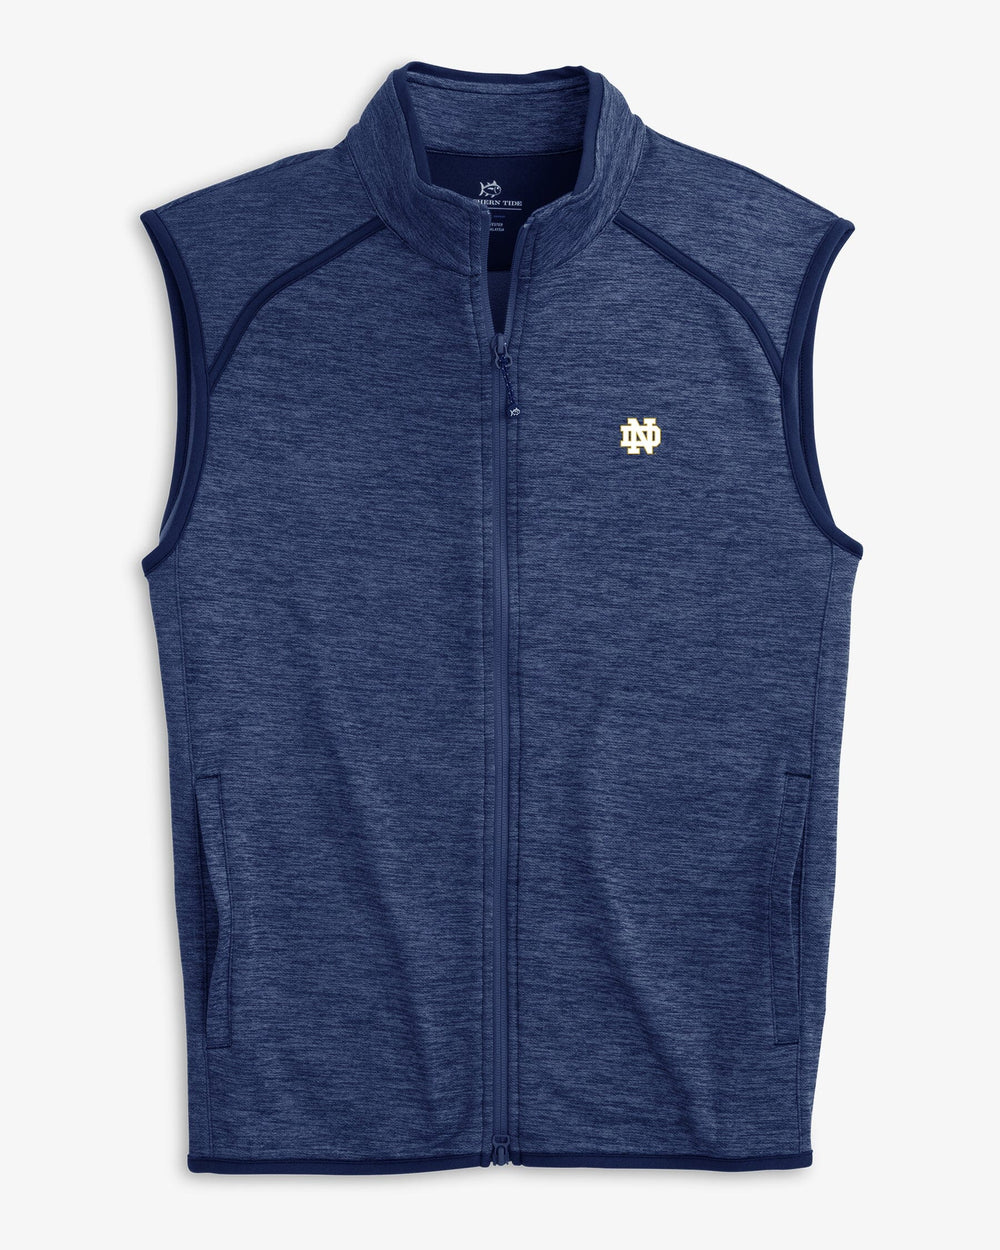 The view of the Notre Dame Fighting Irish Baybrook Heather Vest by Southern Tide - Heather Navy